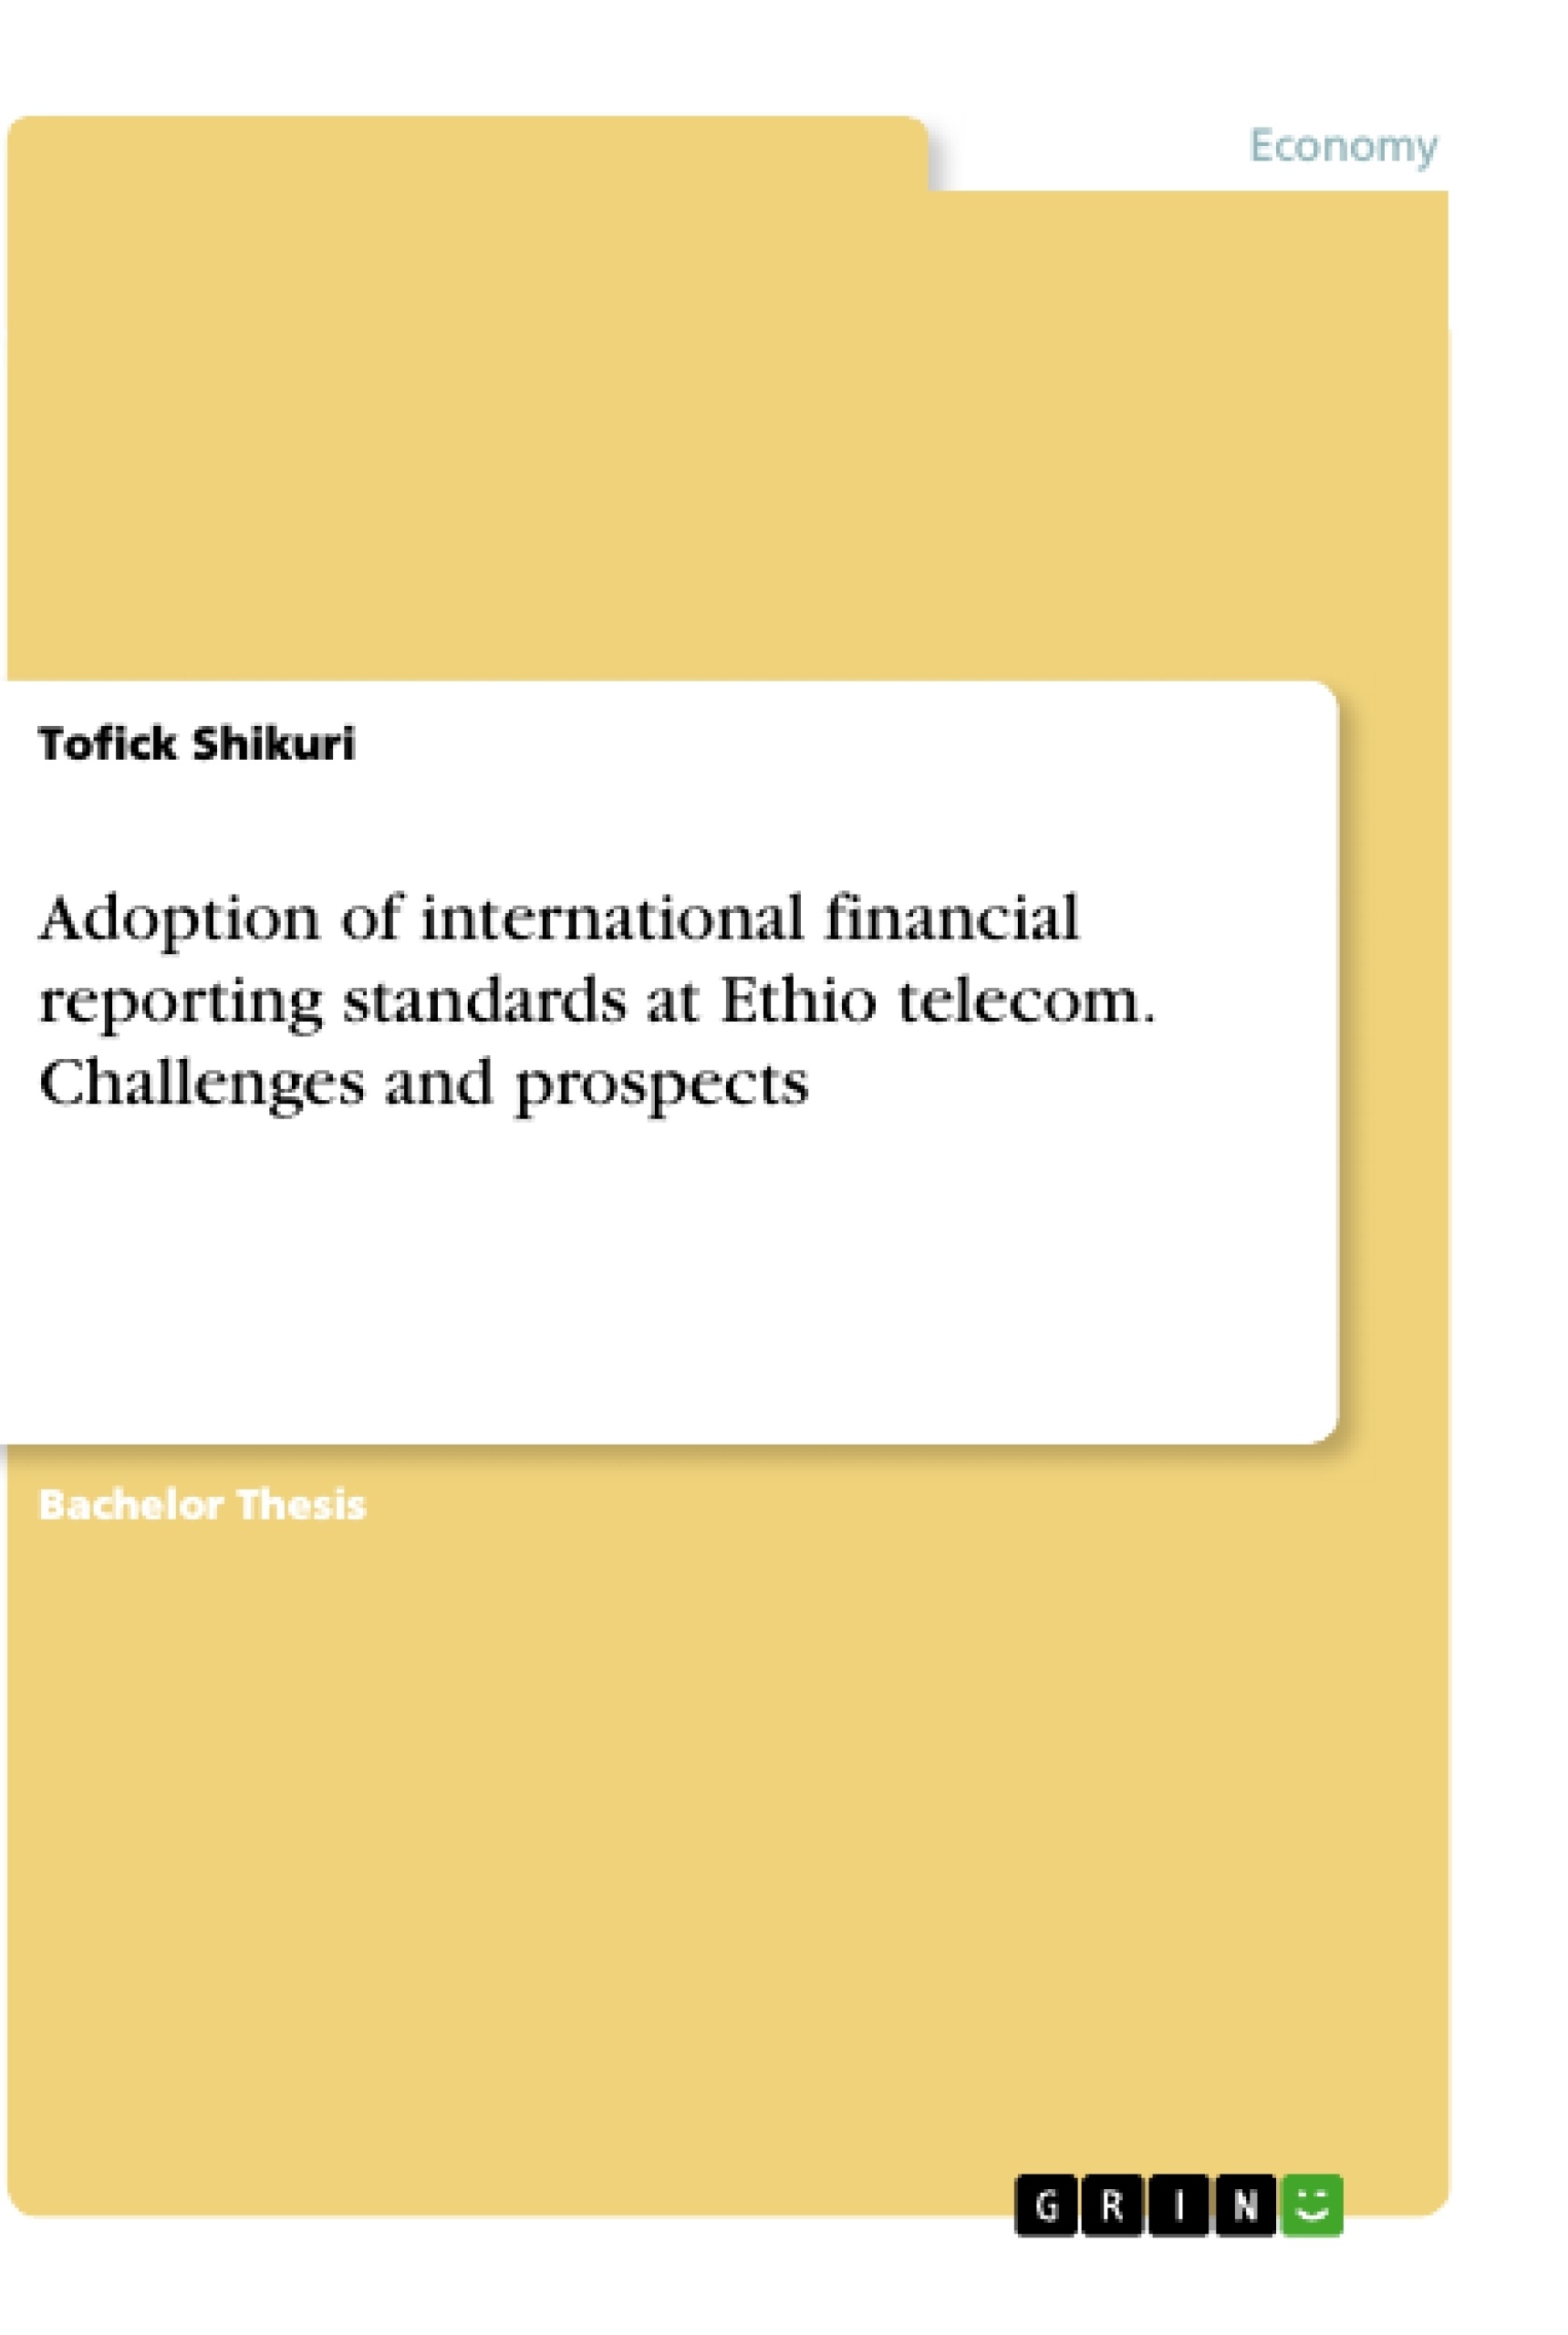 Titre: Adoption of international financial reporting standards at Ethio telecom. Challenges and prospects